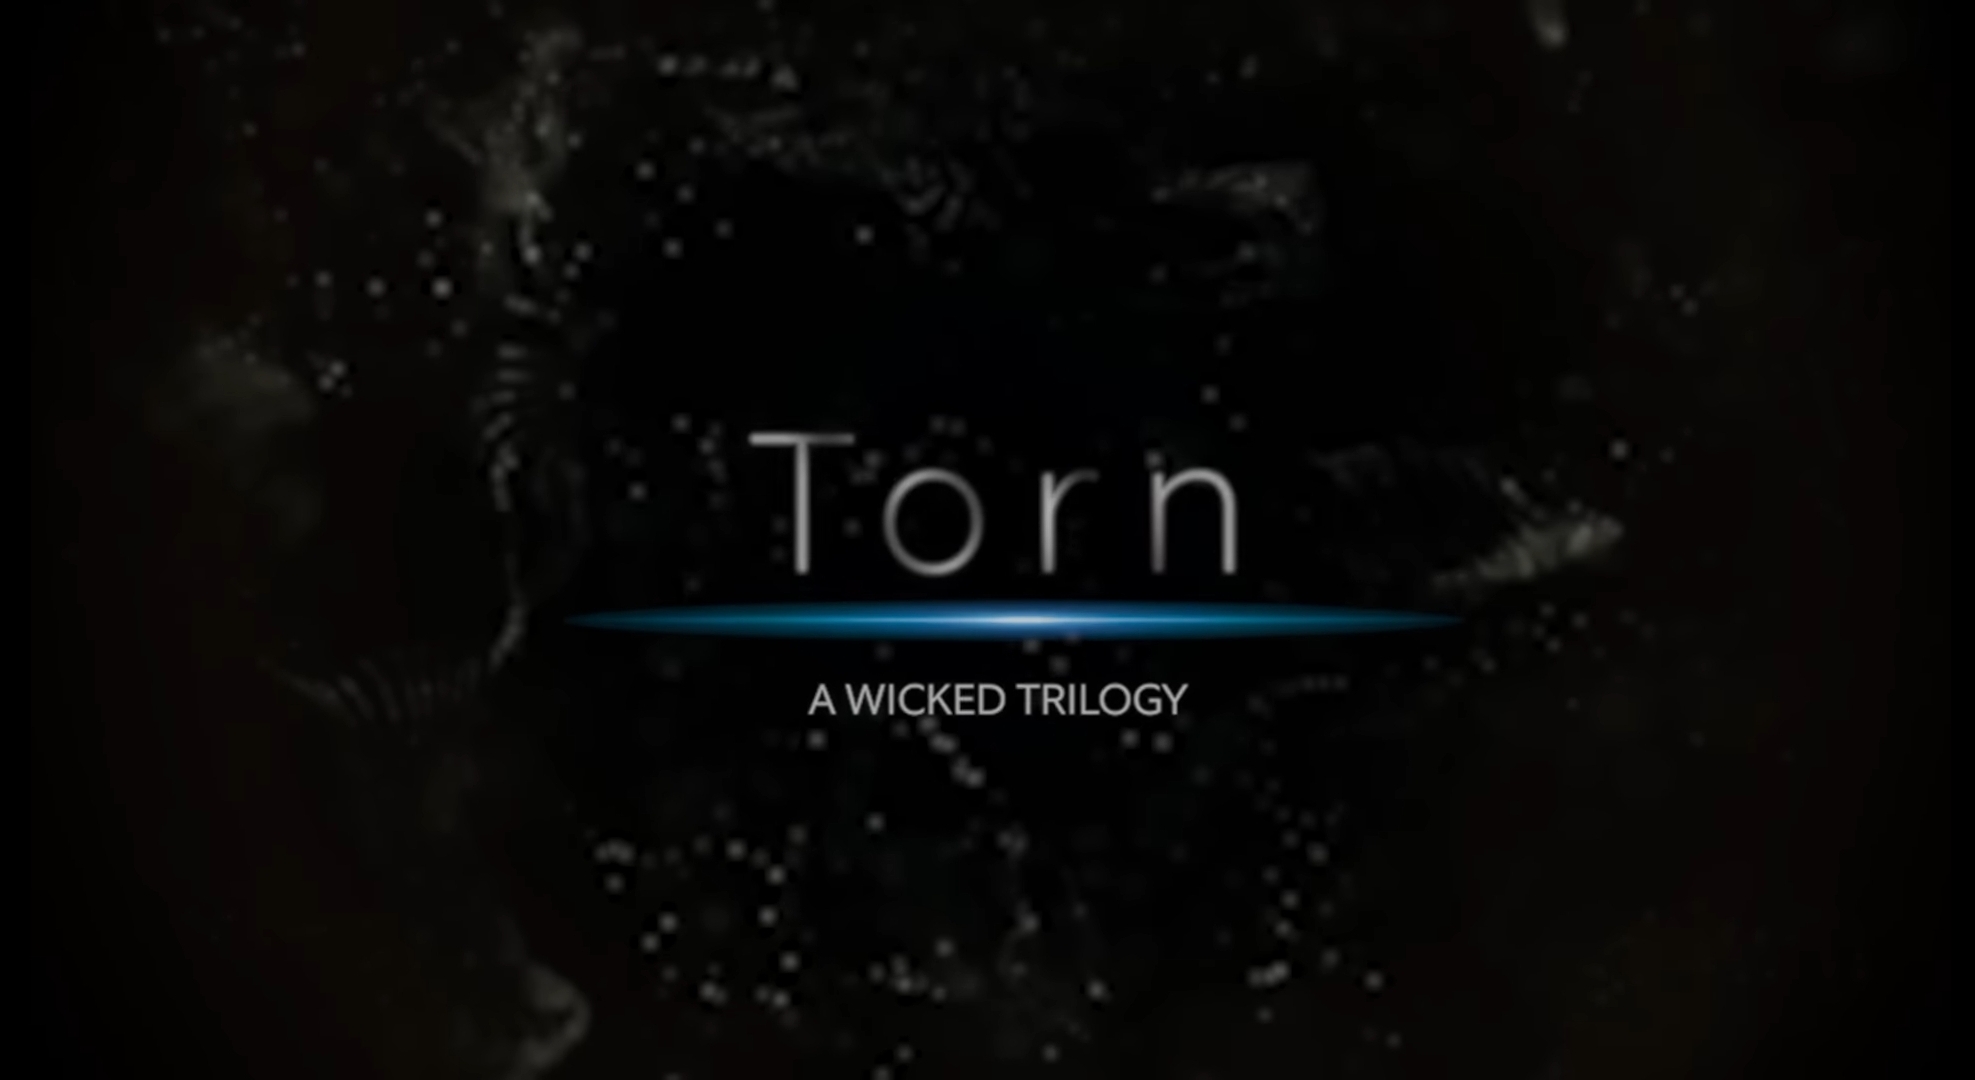 Torn (A Wicked Trilogy) Passionflix